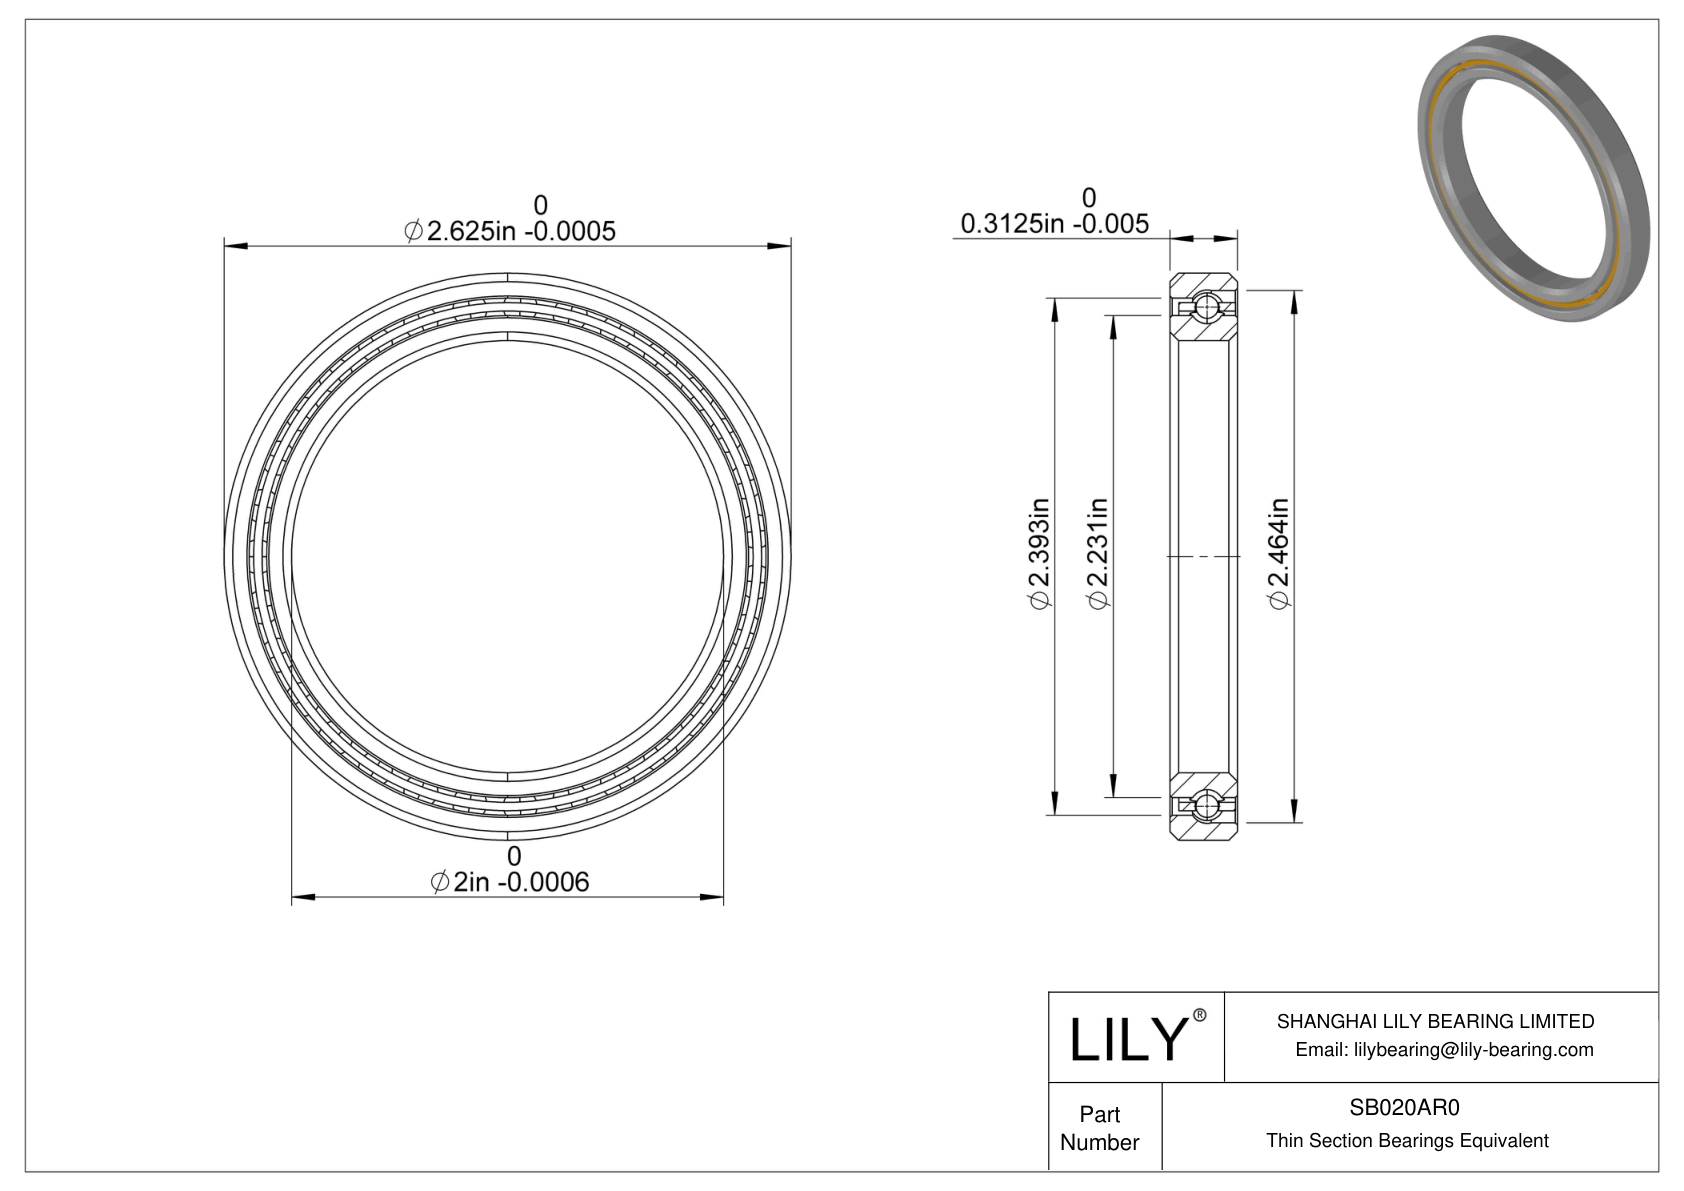 SB020AR0 Constant Section (CS) Bearings cad drawing